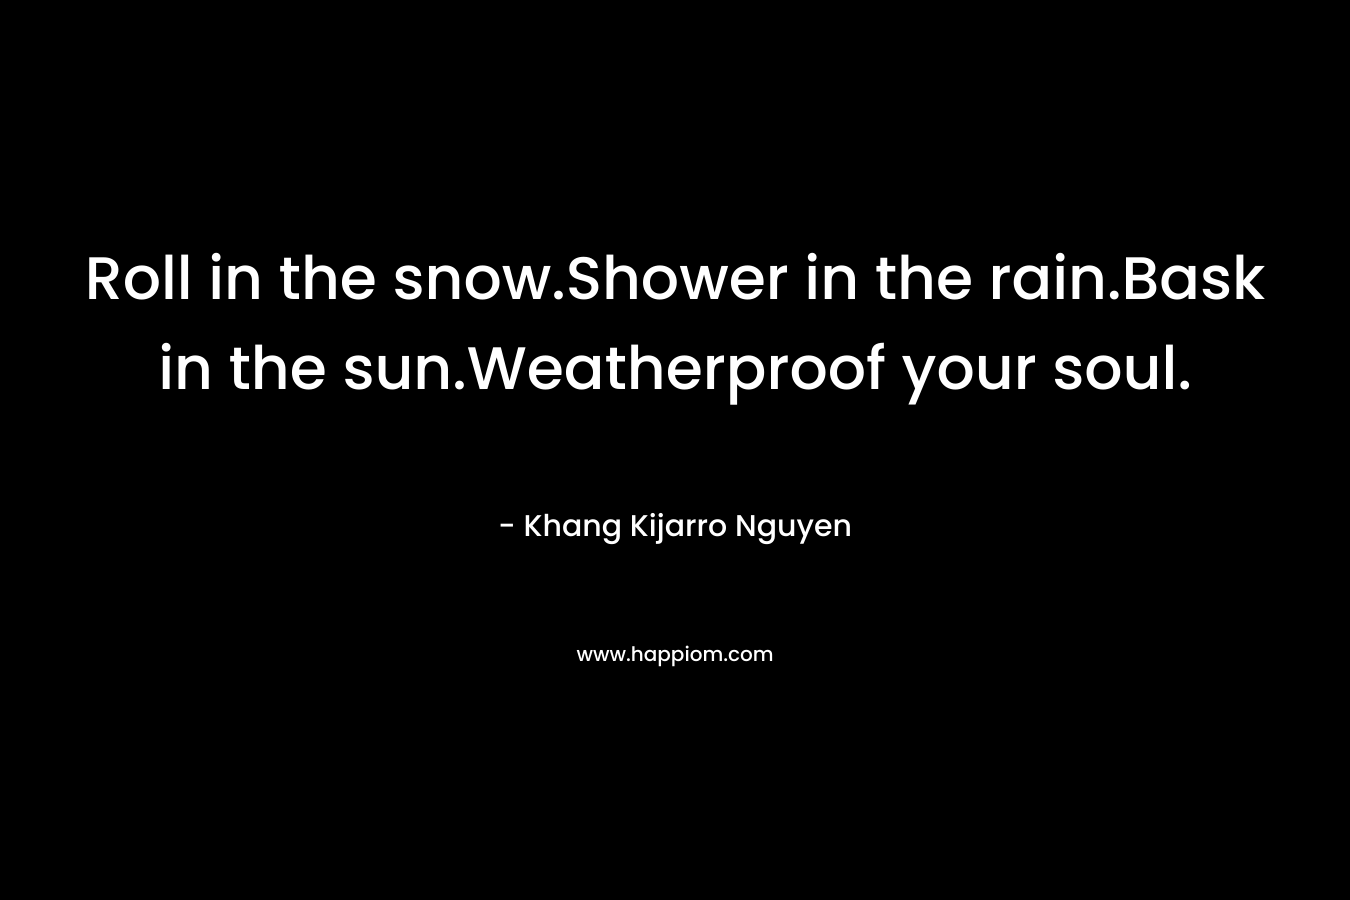 Roll in the snow.Shower in the rain.Bask in the sun.Weatherproof your soul.